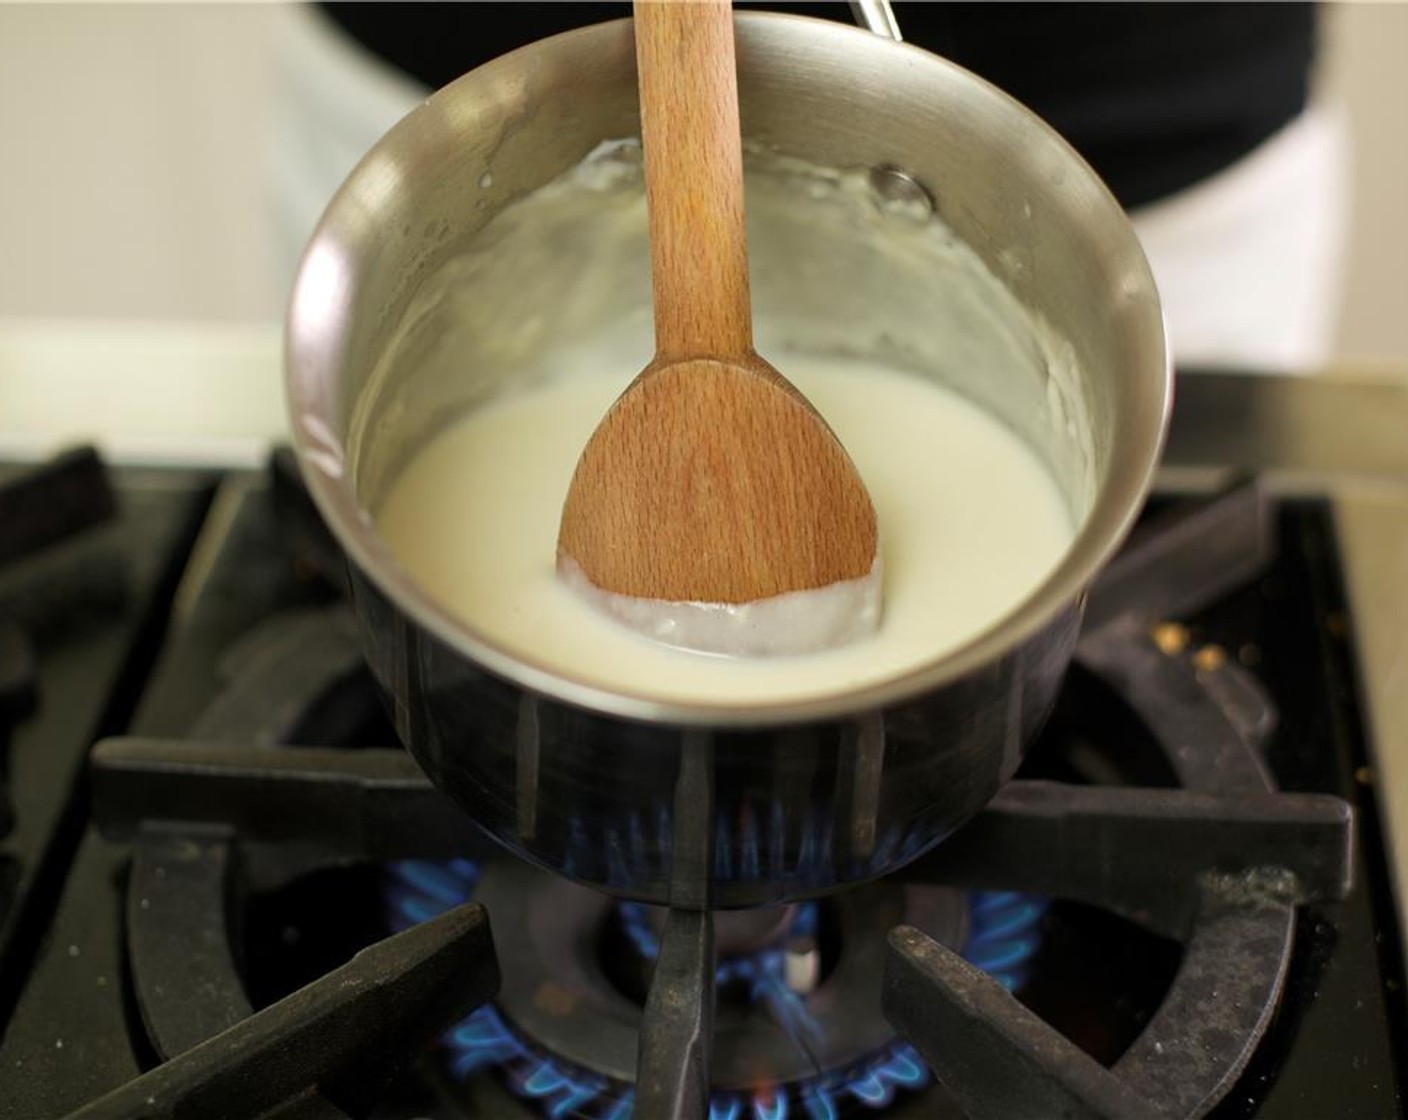 step 9 Stir in Milk (1 cup), garlic and Salt (1/4 tsp). Cook for 3-4minutes or until mixture begins to thicken. Stir constantly, and be careful not to let burn!